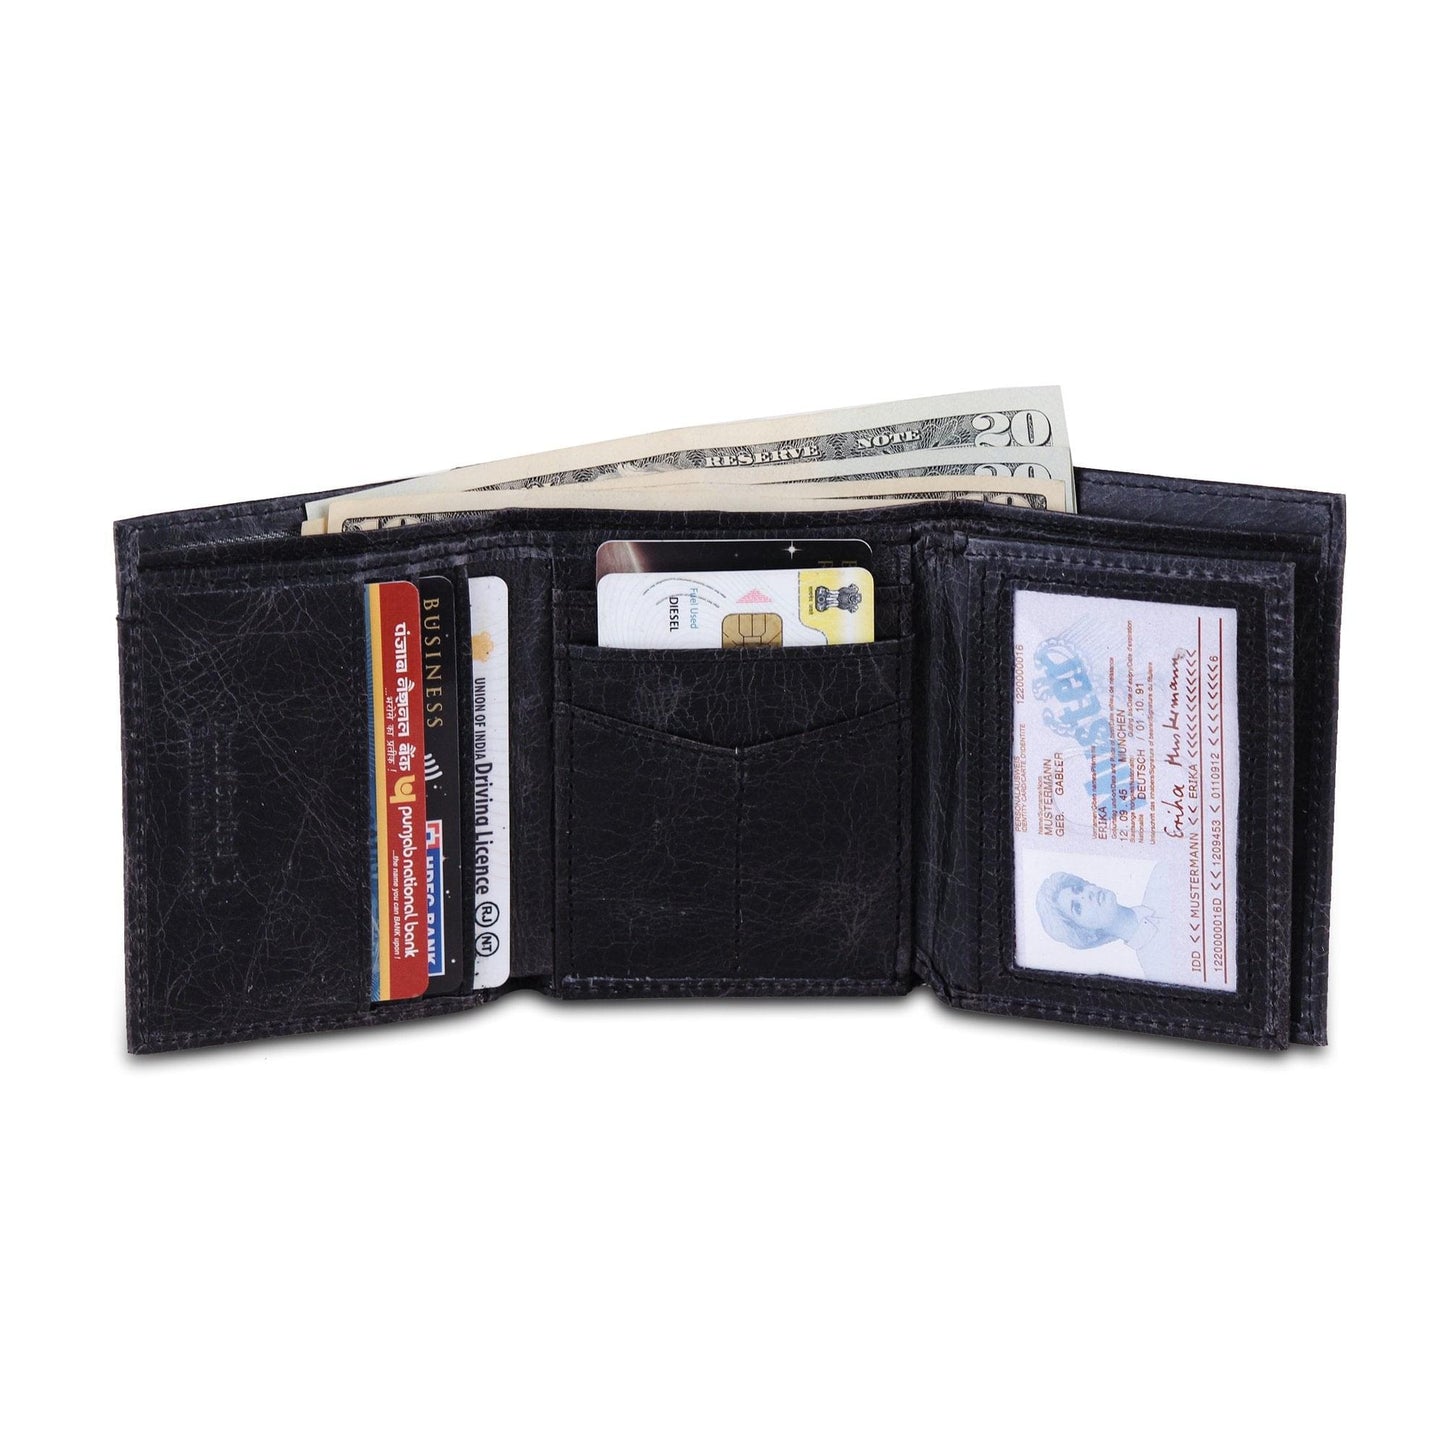 Genuine Buffalo Leather Trifold Wallet For Men